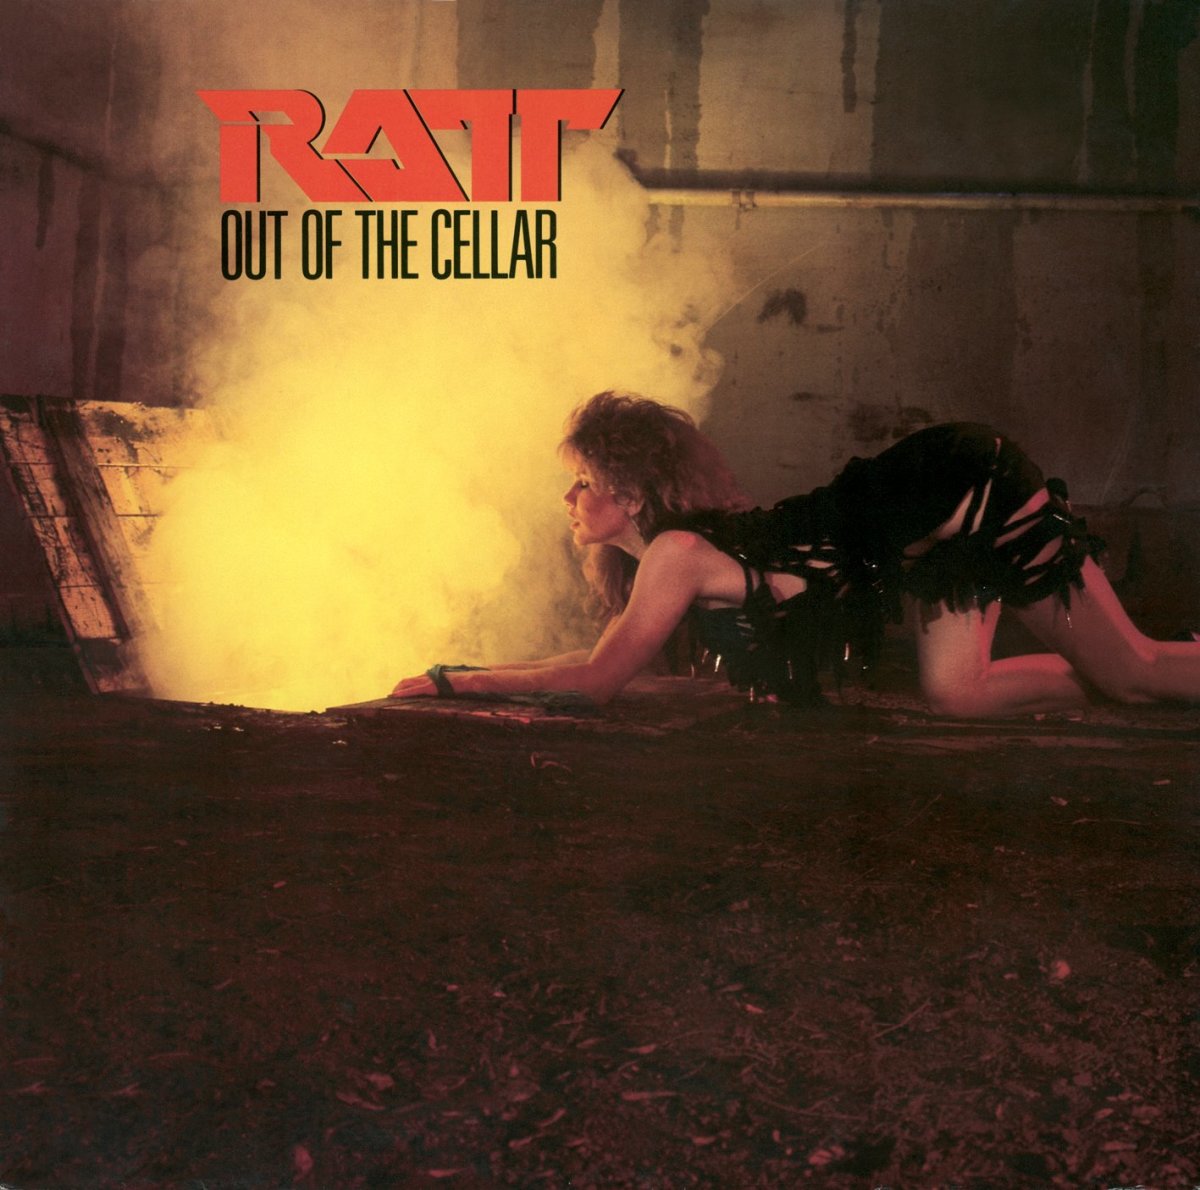 Ratt - Out of the Cellar album cover